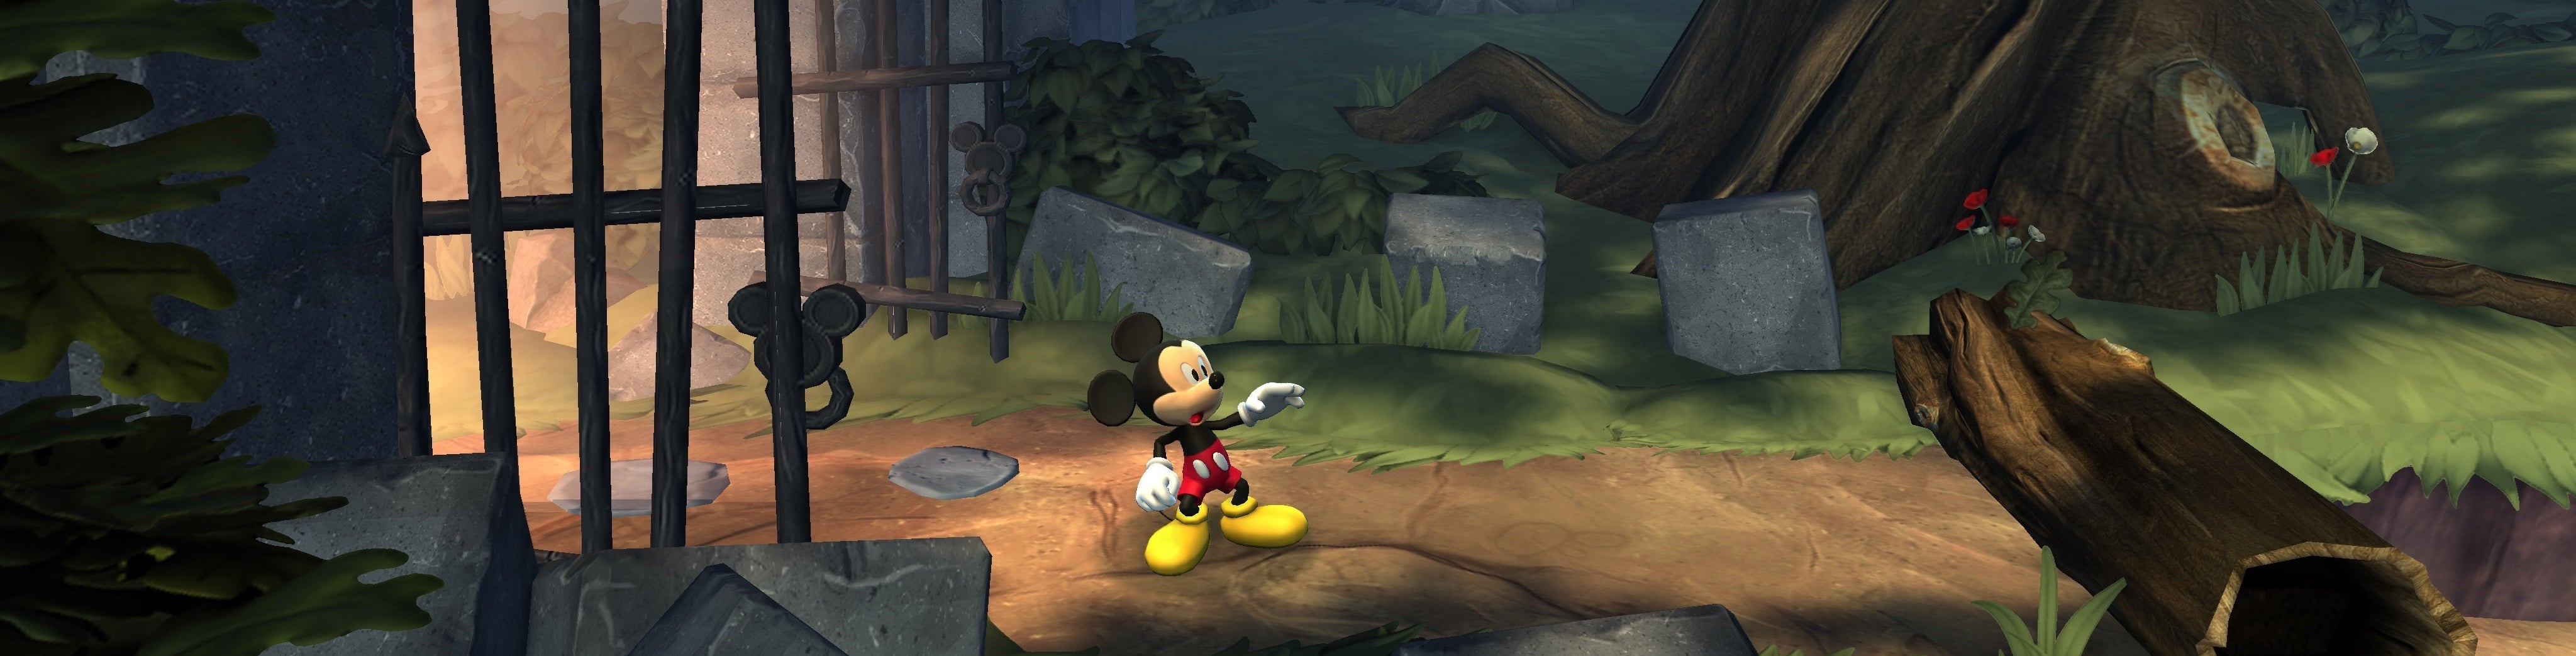 Afbeeldingen van Castle of Illusion Starring Mickey Mouse review